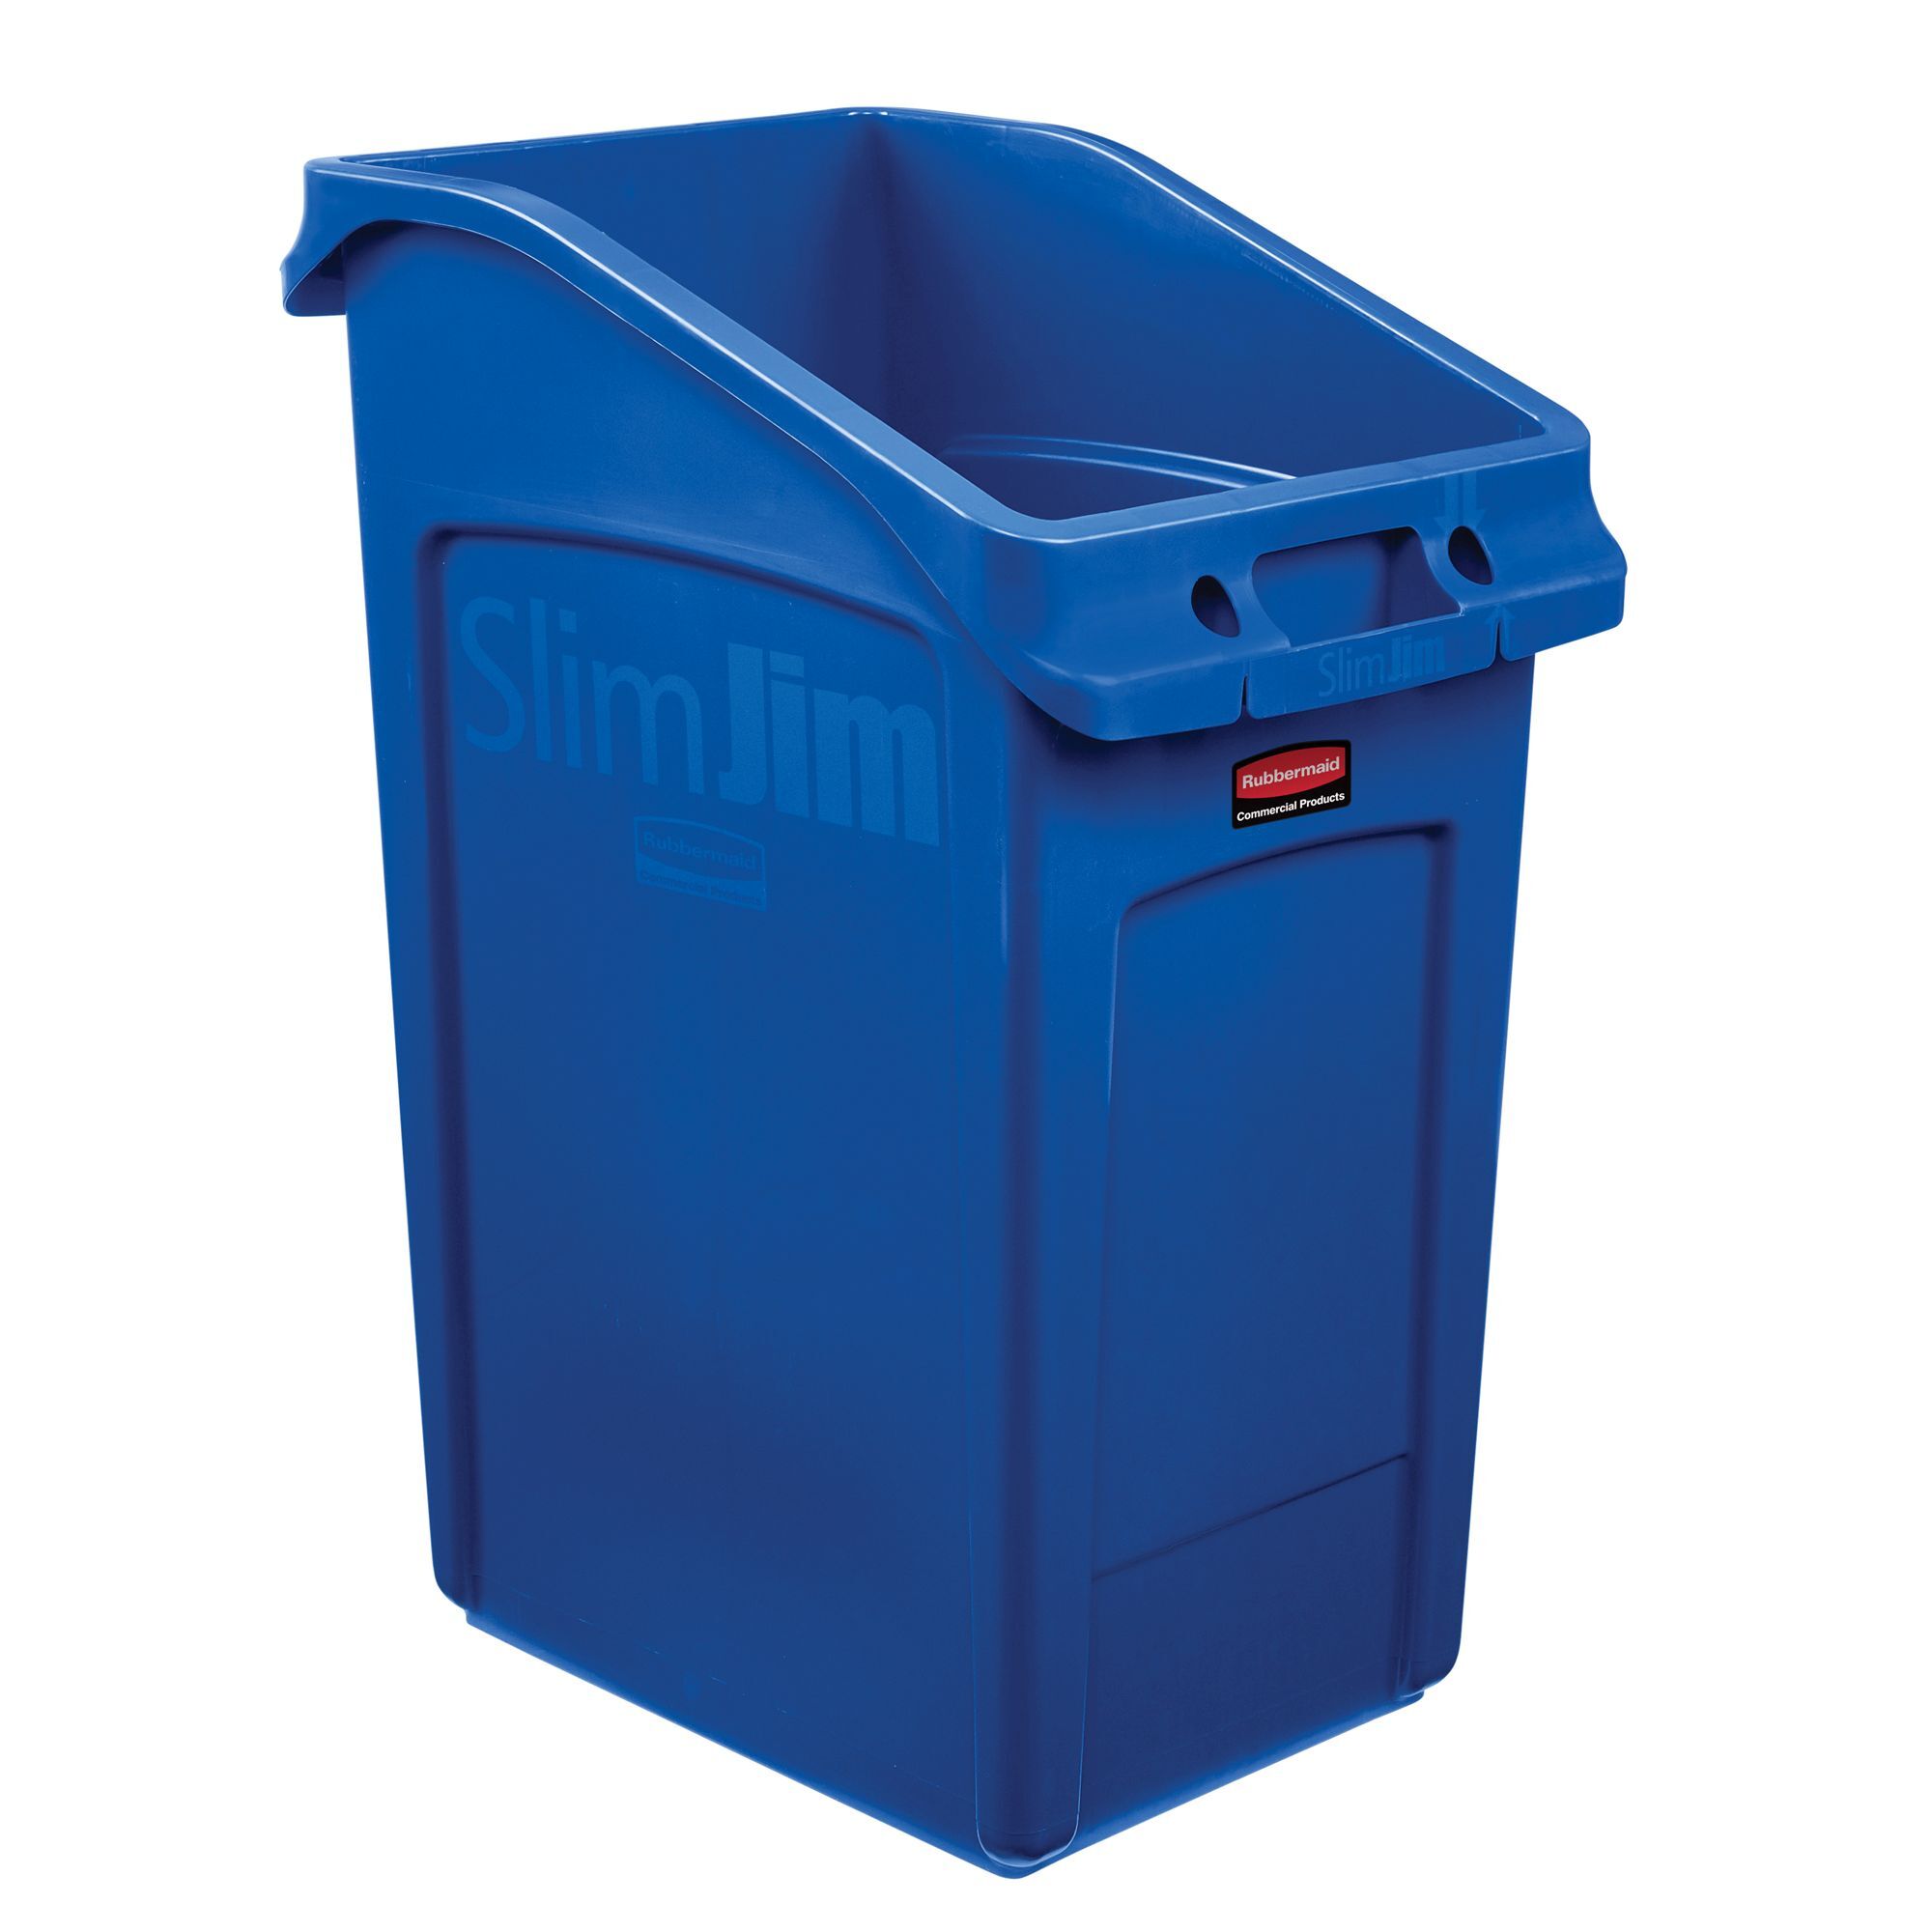 Rubbermaid Slim Jim Under-Counter container 87 ltr, Rubbermaid, model: VB 237733, blauw